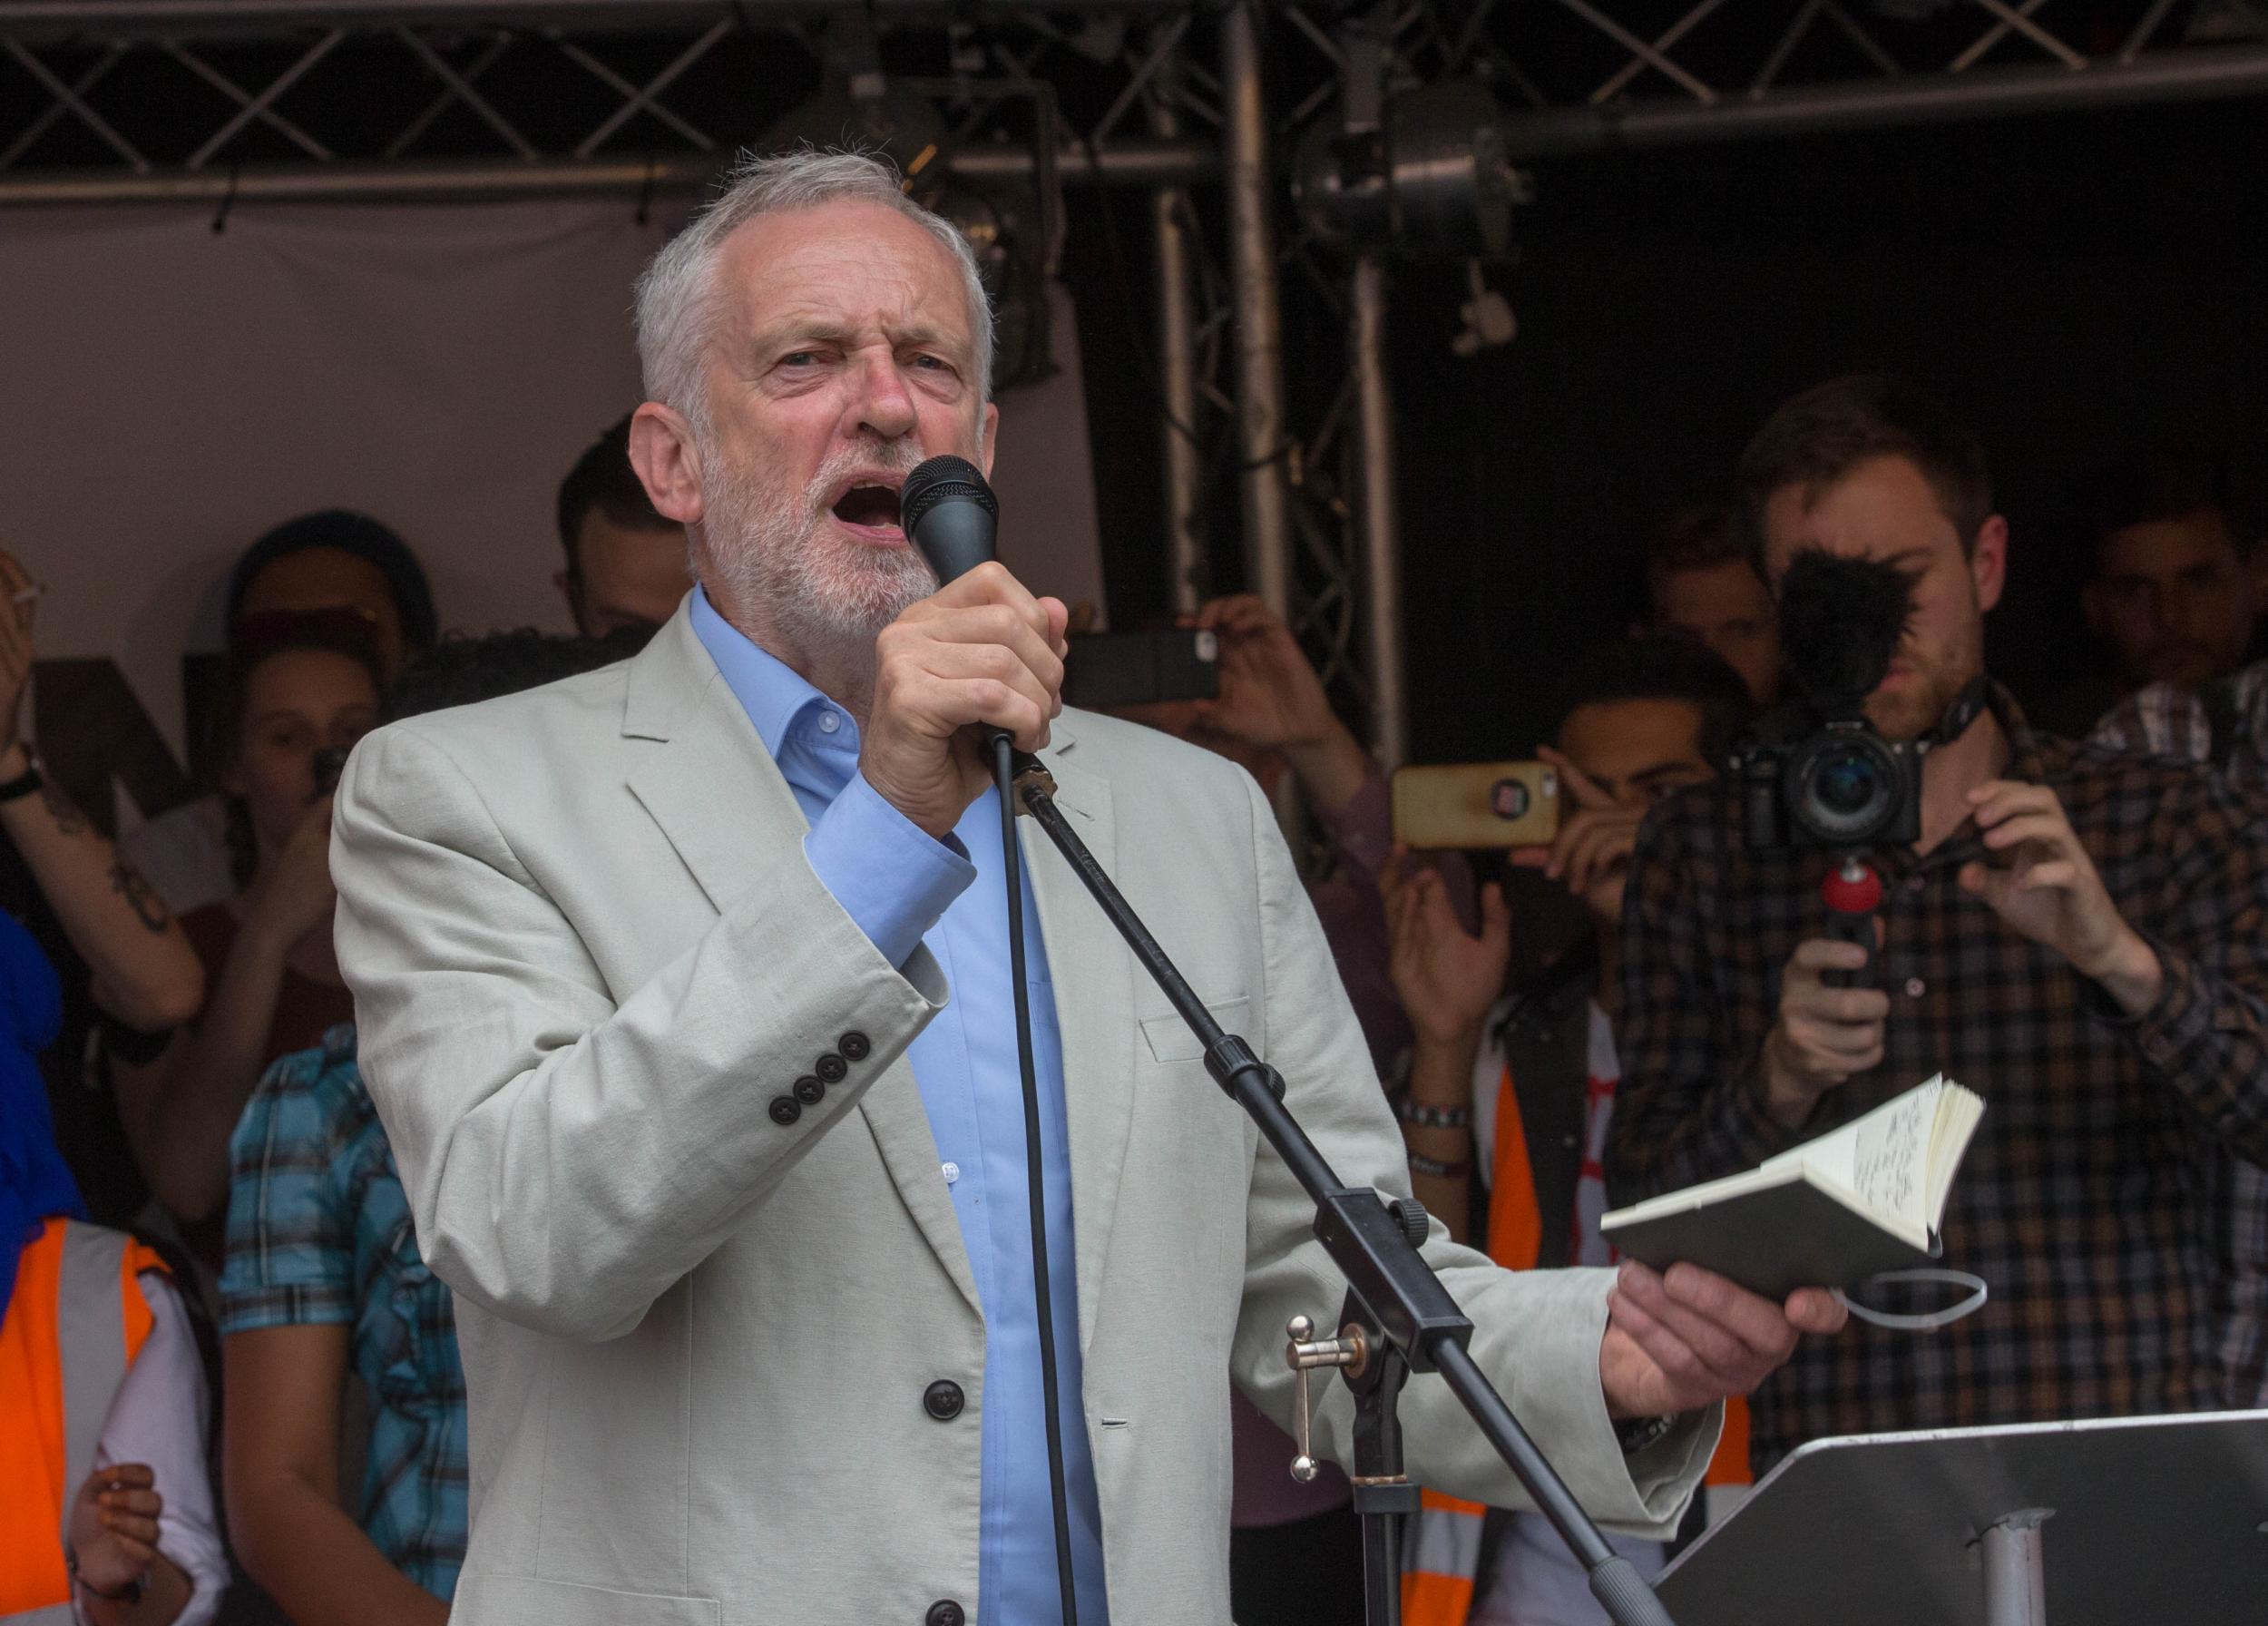 The Labour leader’s ideas were never subjected to proper scrutiny